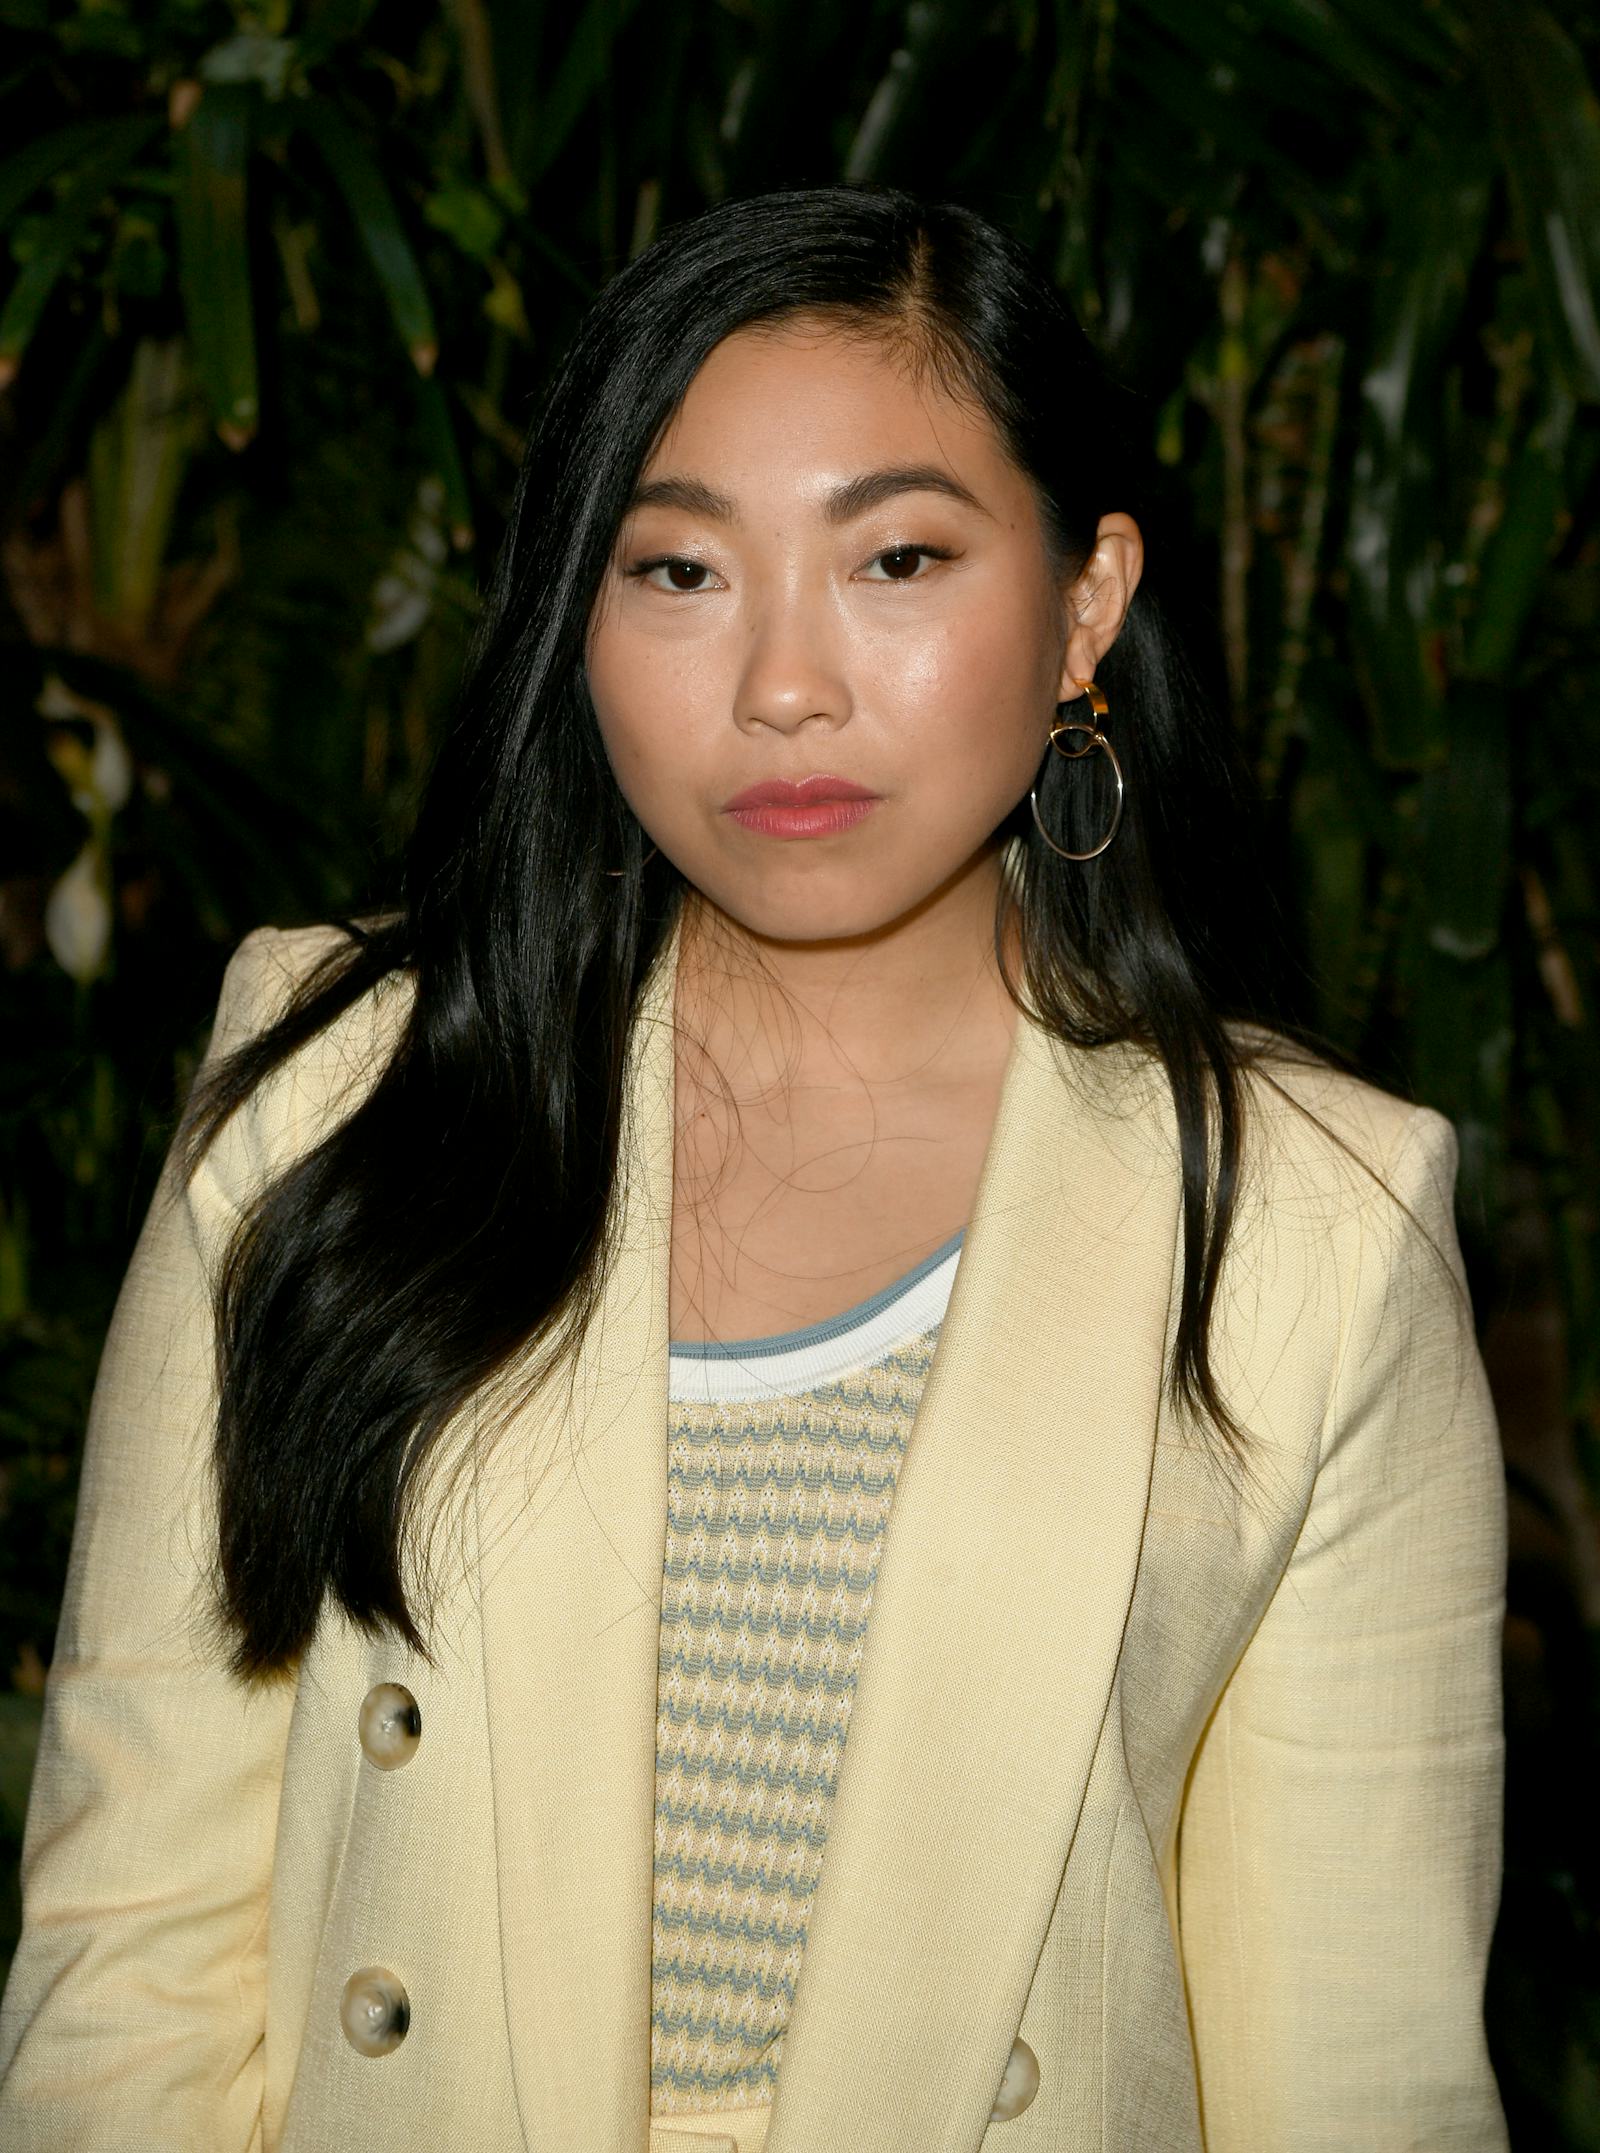 Is Awkwafina Dating Anyone? She Once Gushed About Being In Love